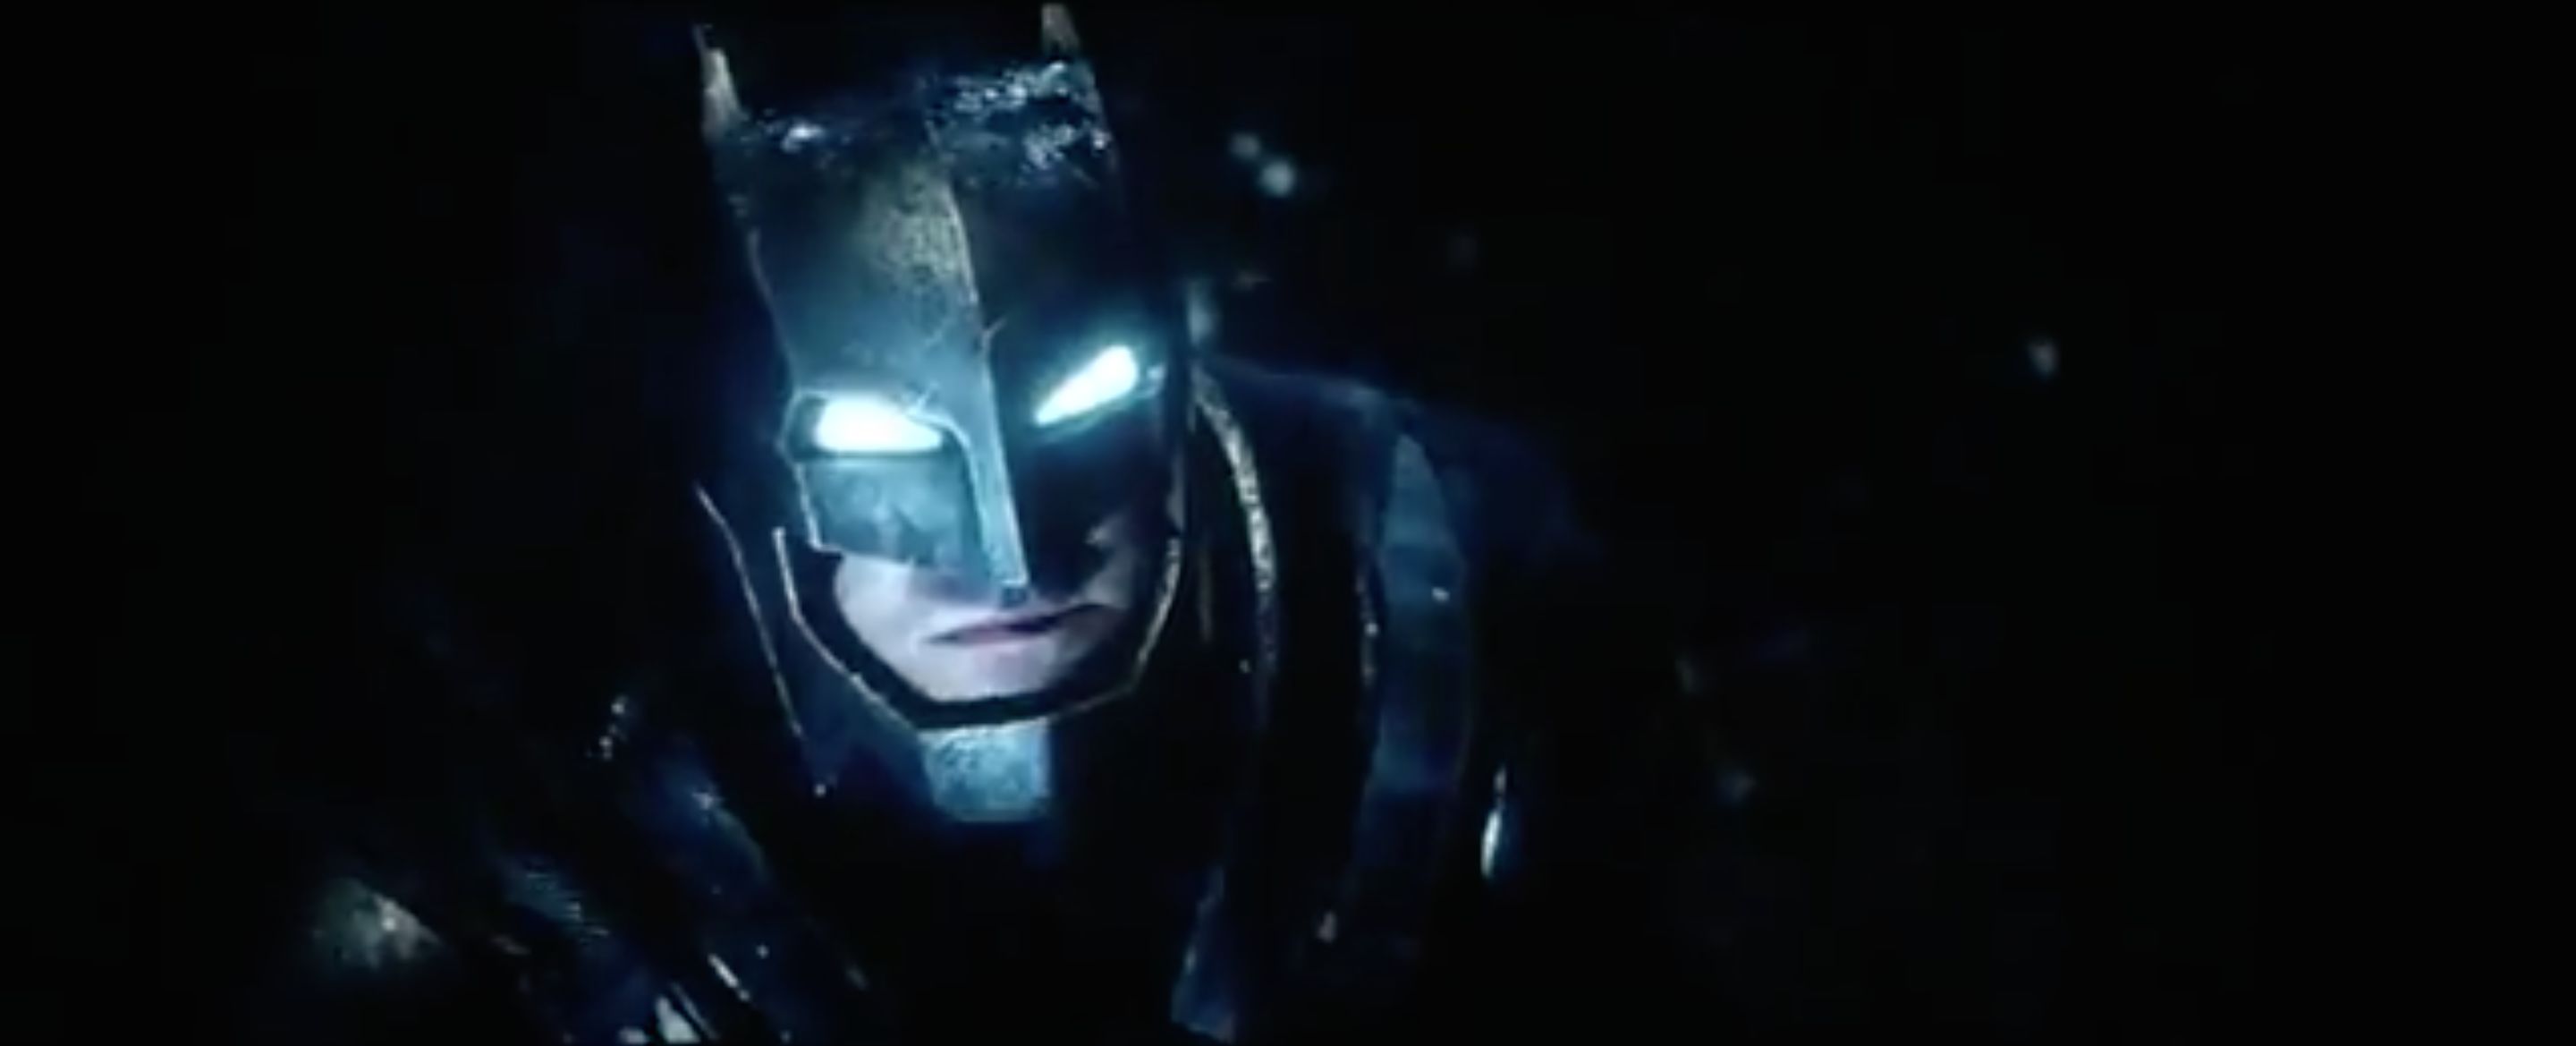 the-batman-v-superman-trailer-has-leaked-online-and-it-s-absolutely-incredible-360913.jpg